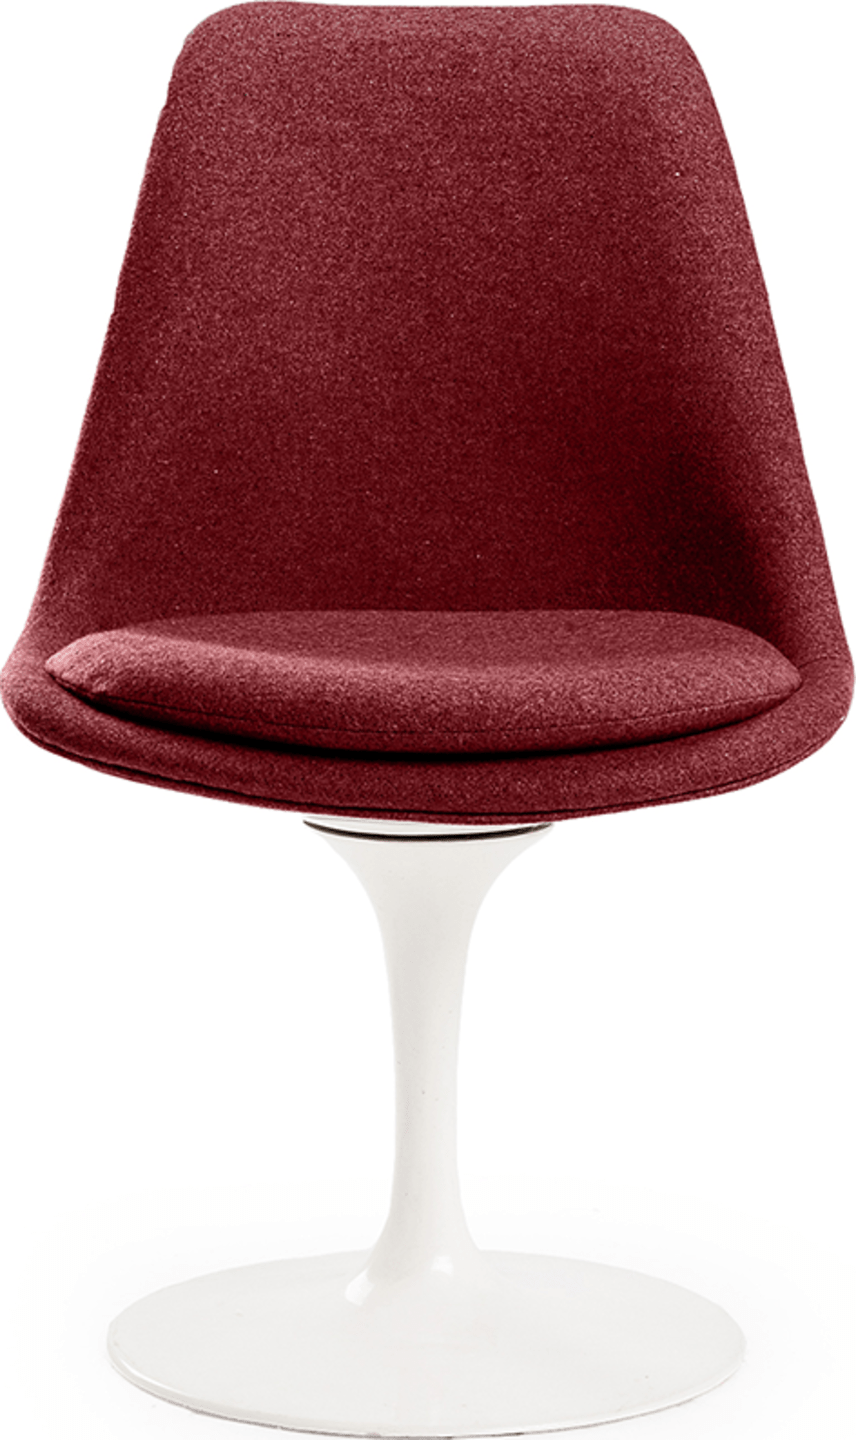 Tulip Chair Upholstered Deep Red image.